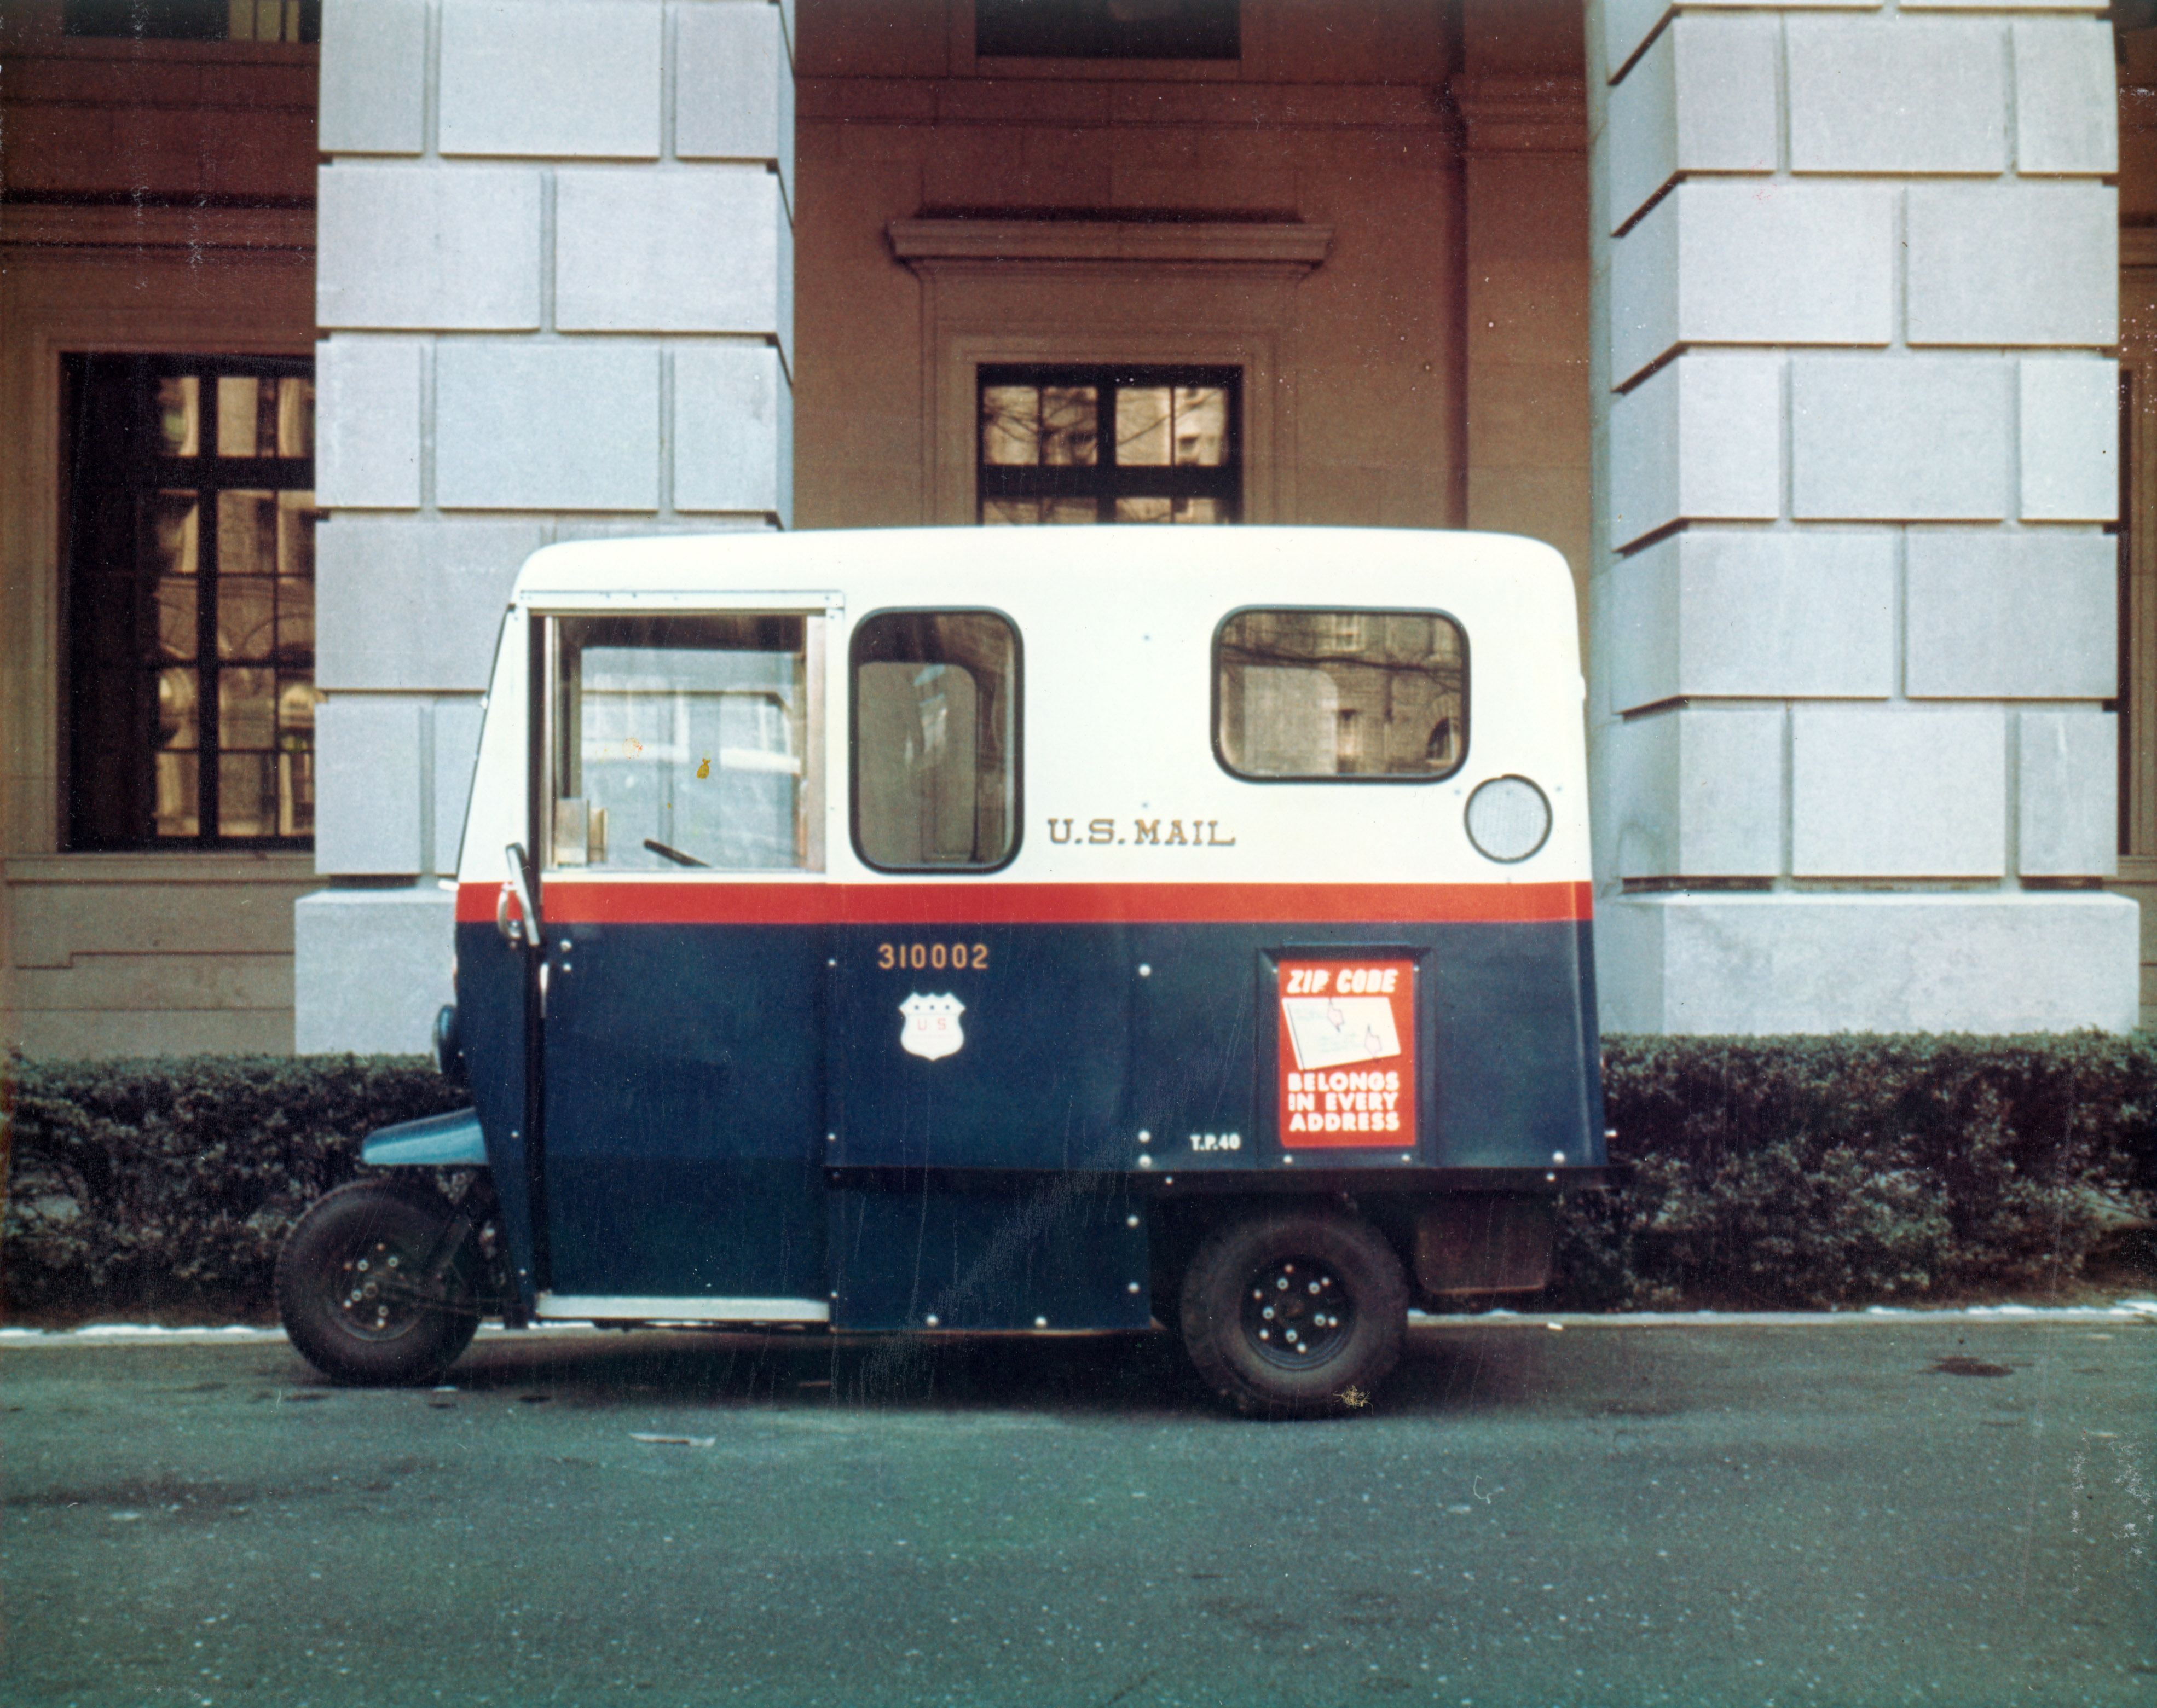 Undated color photograph of a three-wheeled U.S. Mail delivery vehicle.